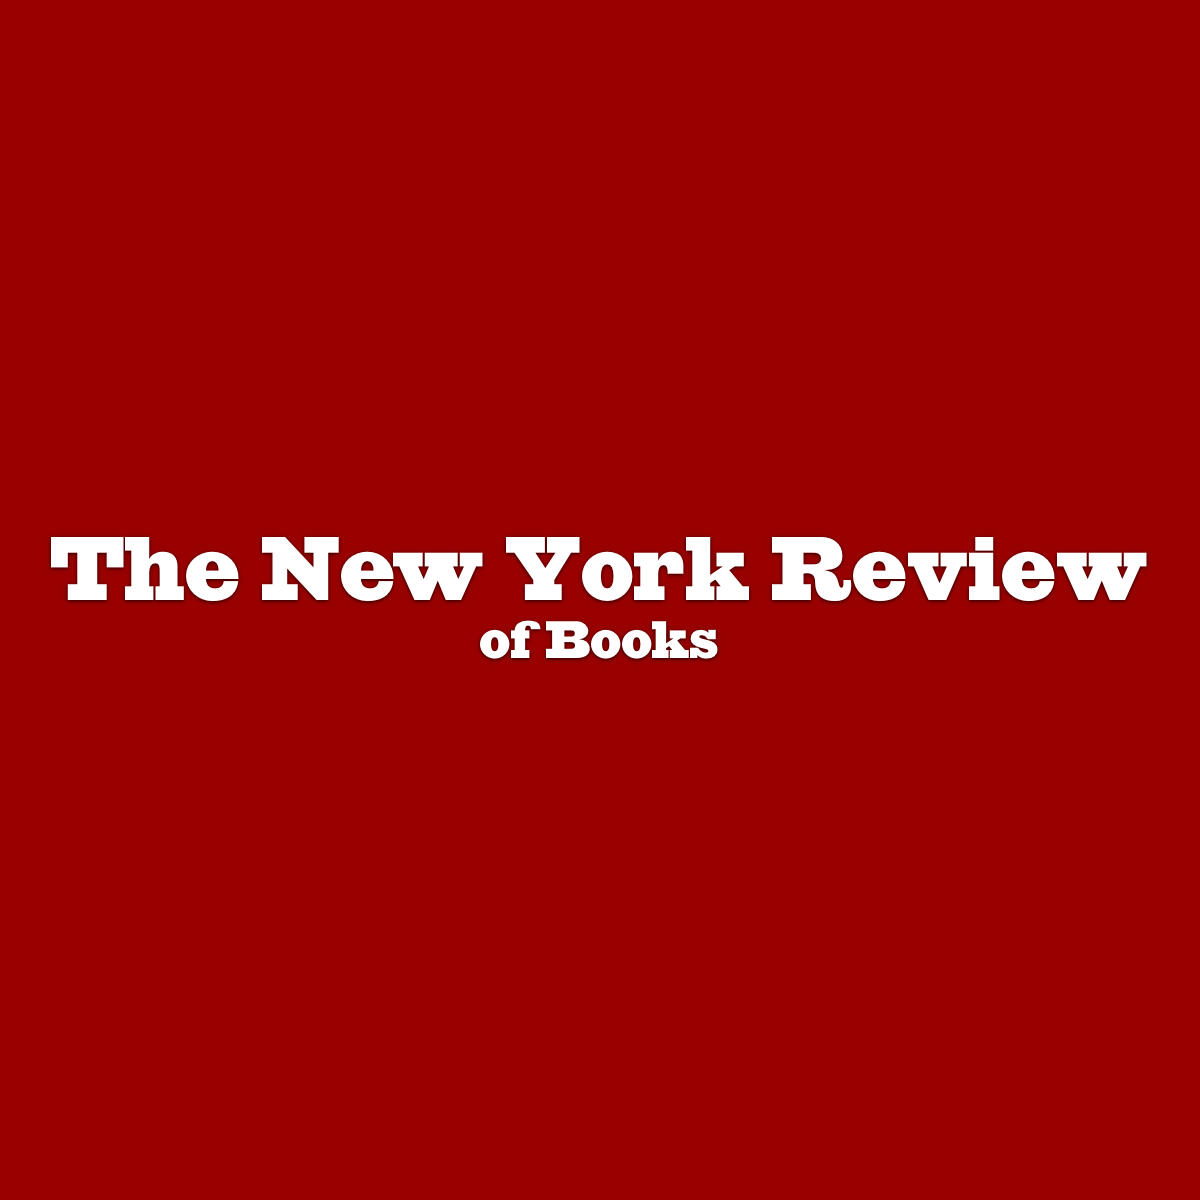 NYRblog - Atwood in the Twittersphere - The New York Review of Books